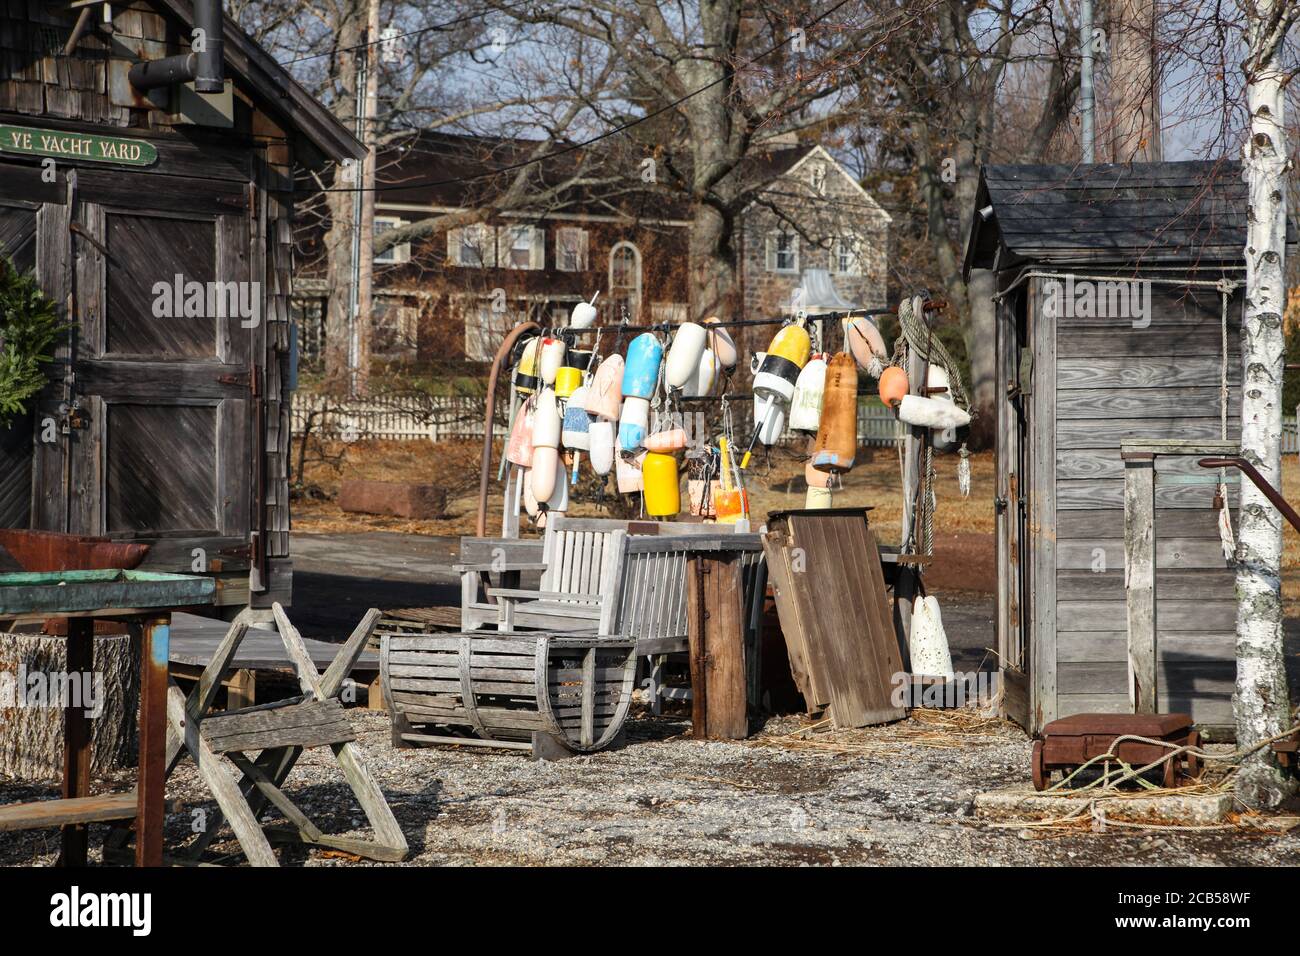 The old rustic shed on the left and bunch of colorful boat fenders in the middle in Southport, Fairfield, CT. Stock Photo